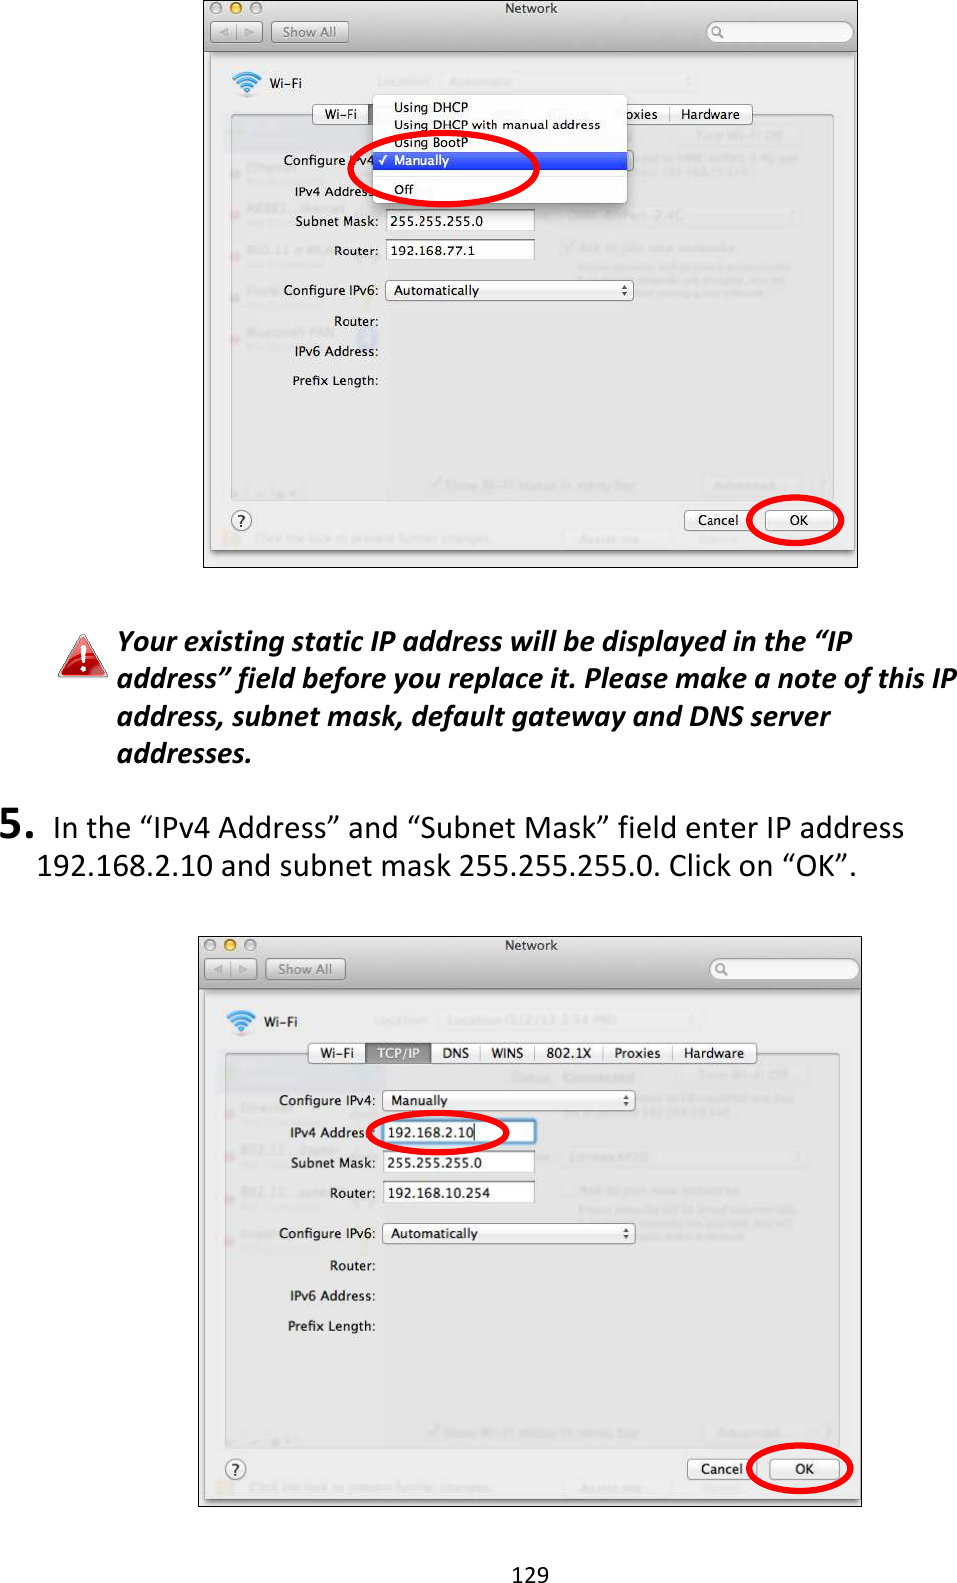 129   Your existing static IP address will be displayed in the “IP address” field before you replace it. Please make a note of this IP address, subnet mask, default gateway and DNS server addresses.  5.   In the “IPv4 Address” and “Subnet Mask” field enter IP address 192.168.2.10 and subnet mask 255.255.255.0. Click on “OK”.    